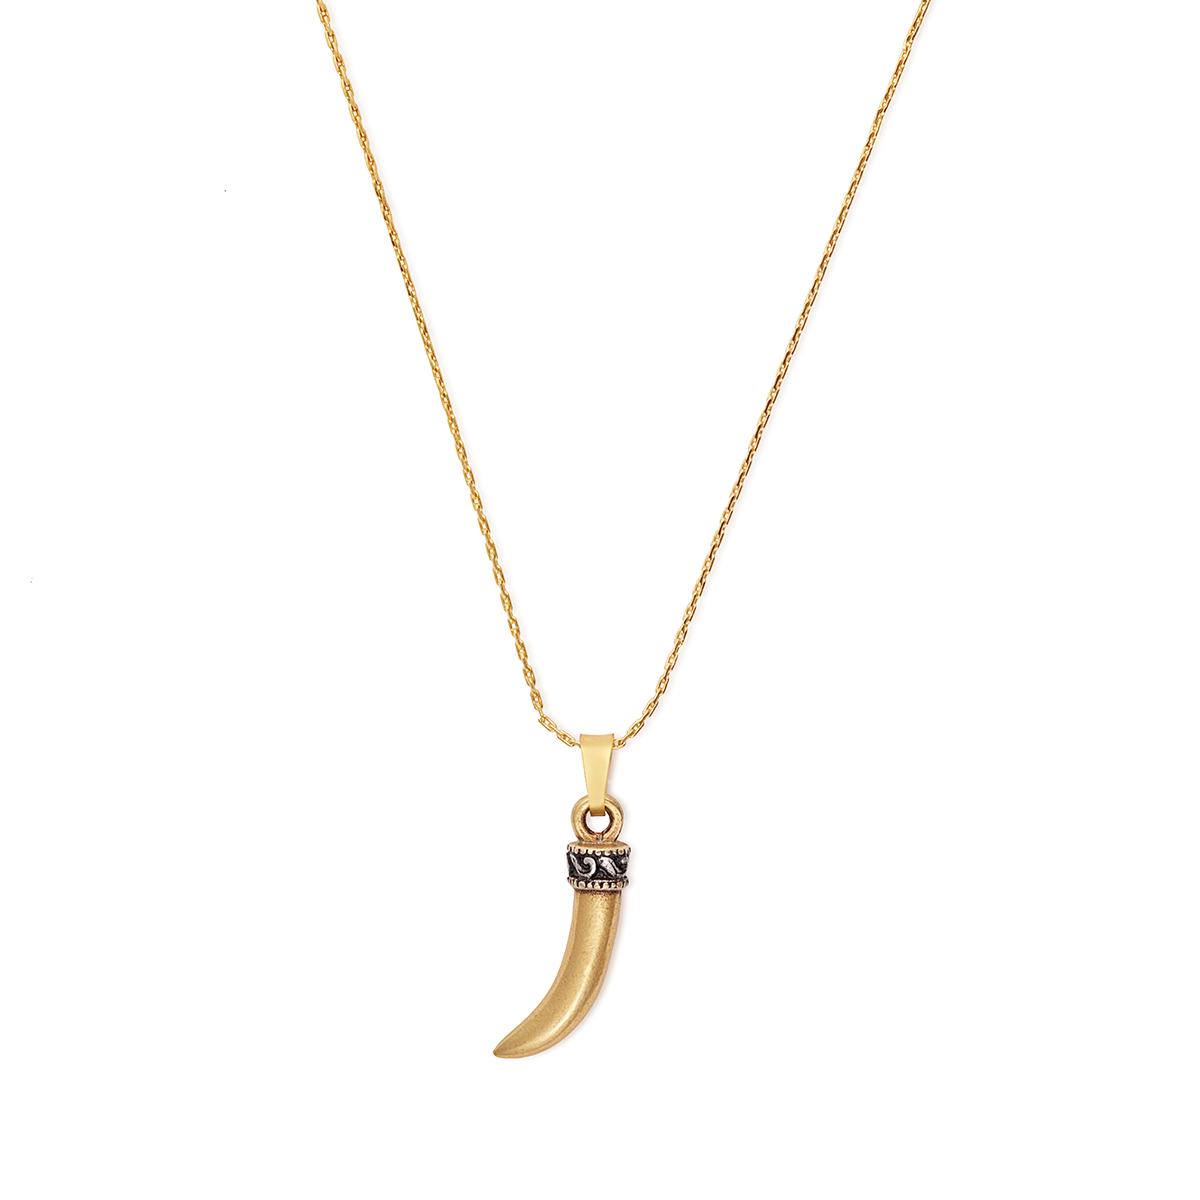 Horn Charm Necklace